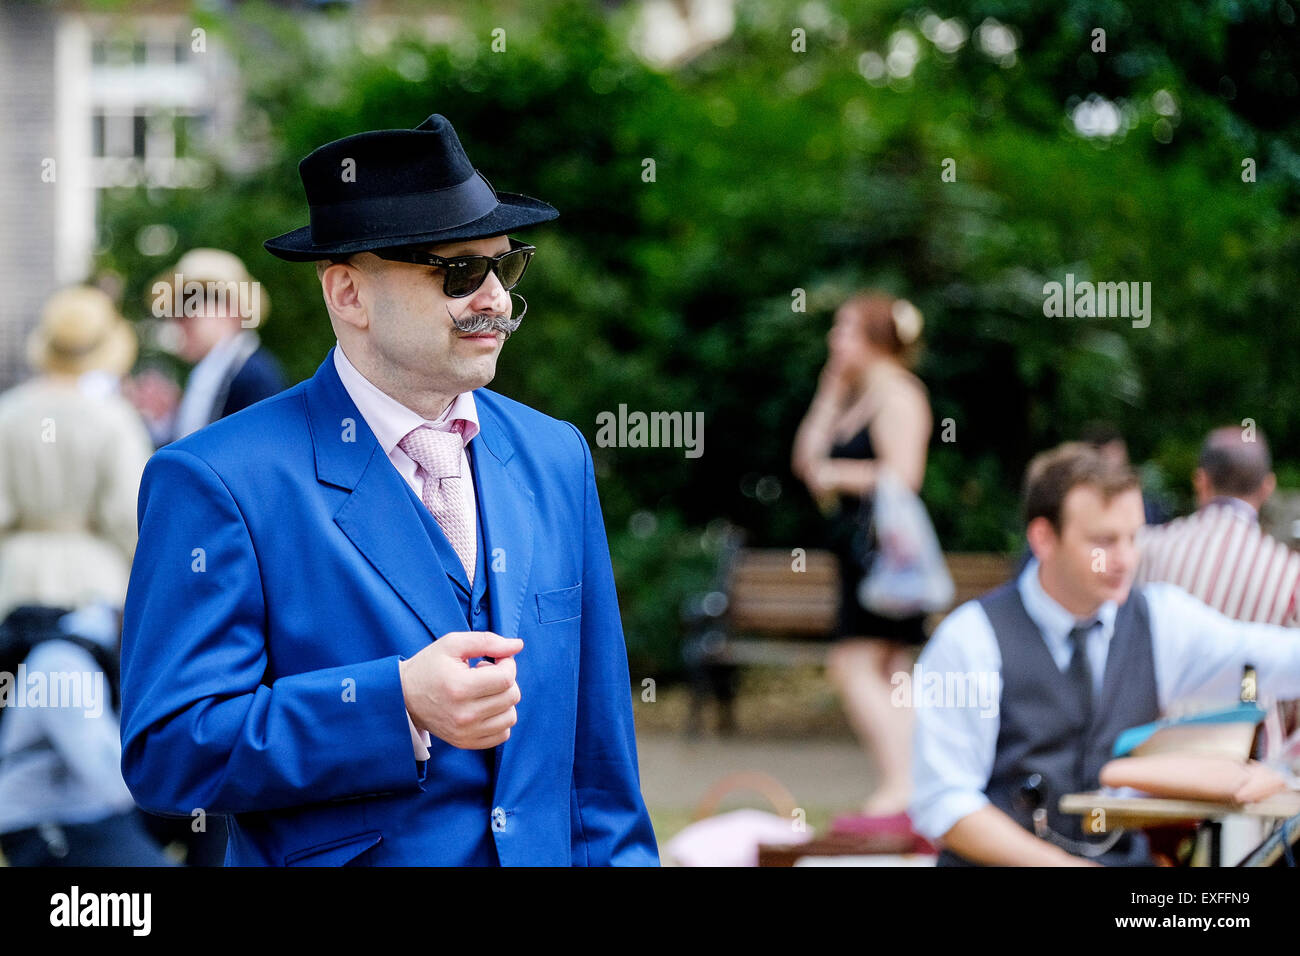 A chap at The Chap Olympiad in Bloomsbury, London. Stock Photo